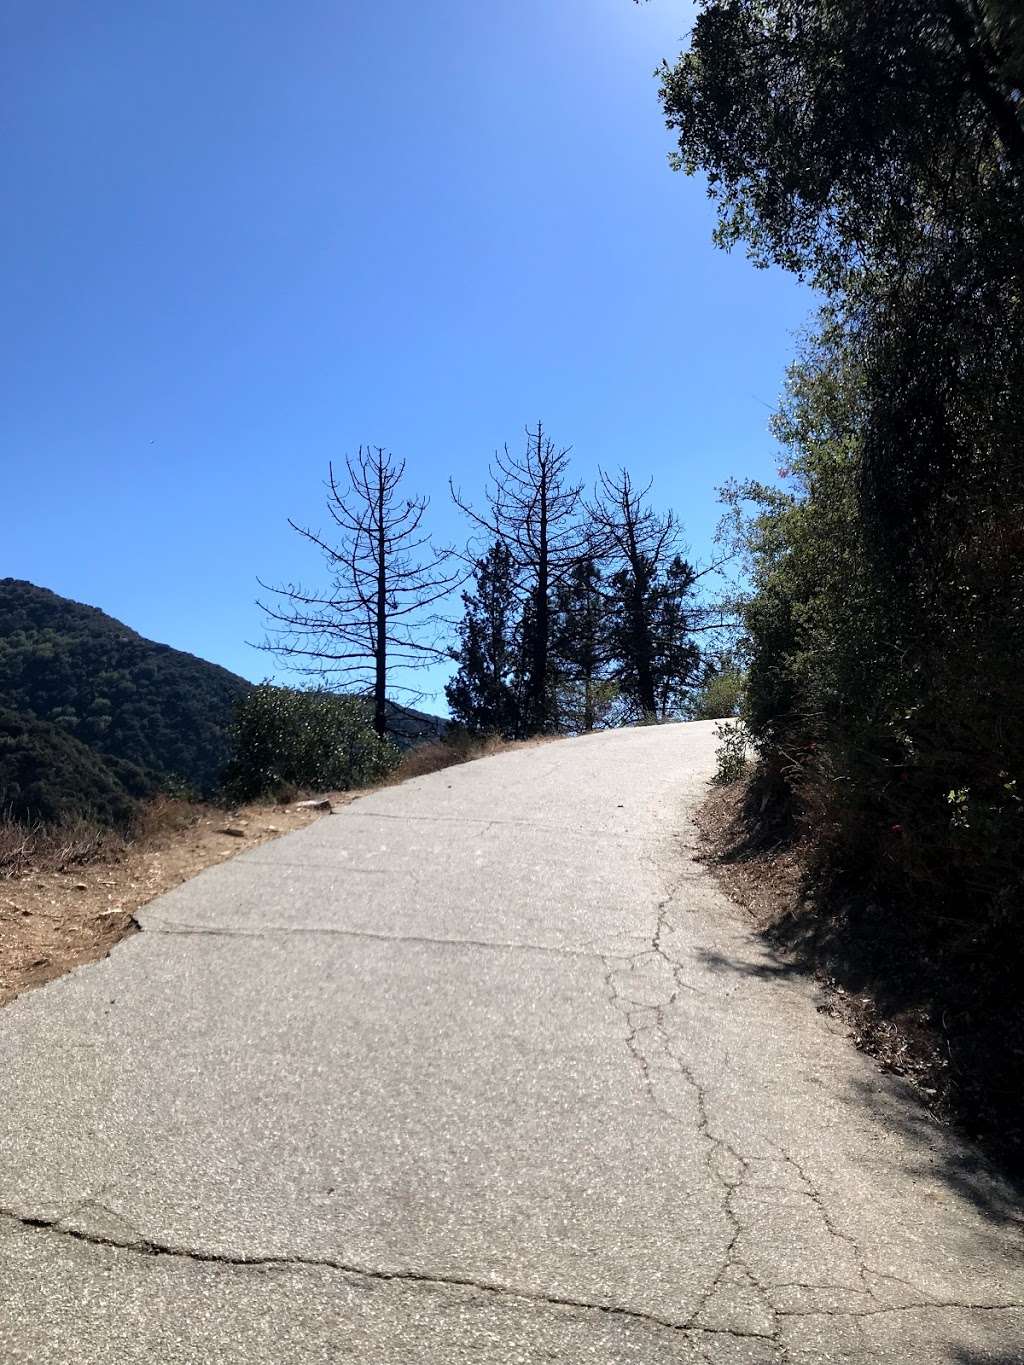 Chantry Flats Parking Lot and Trail Head | Chantry Flats Rd, Arcadia, CA 91006 | Phone: (626) 574-1613